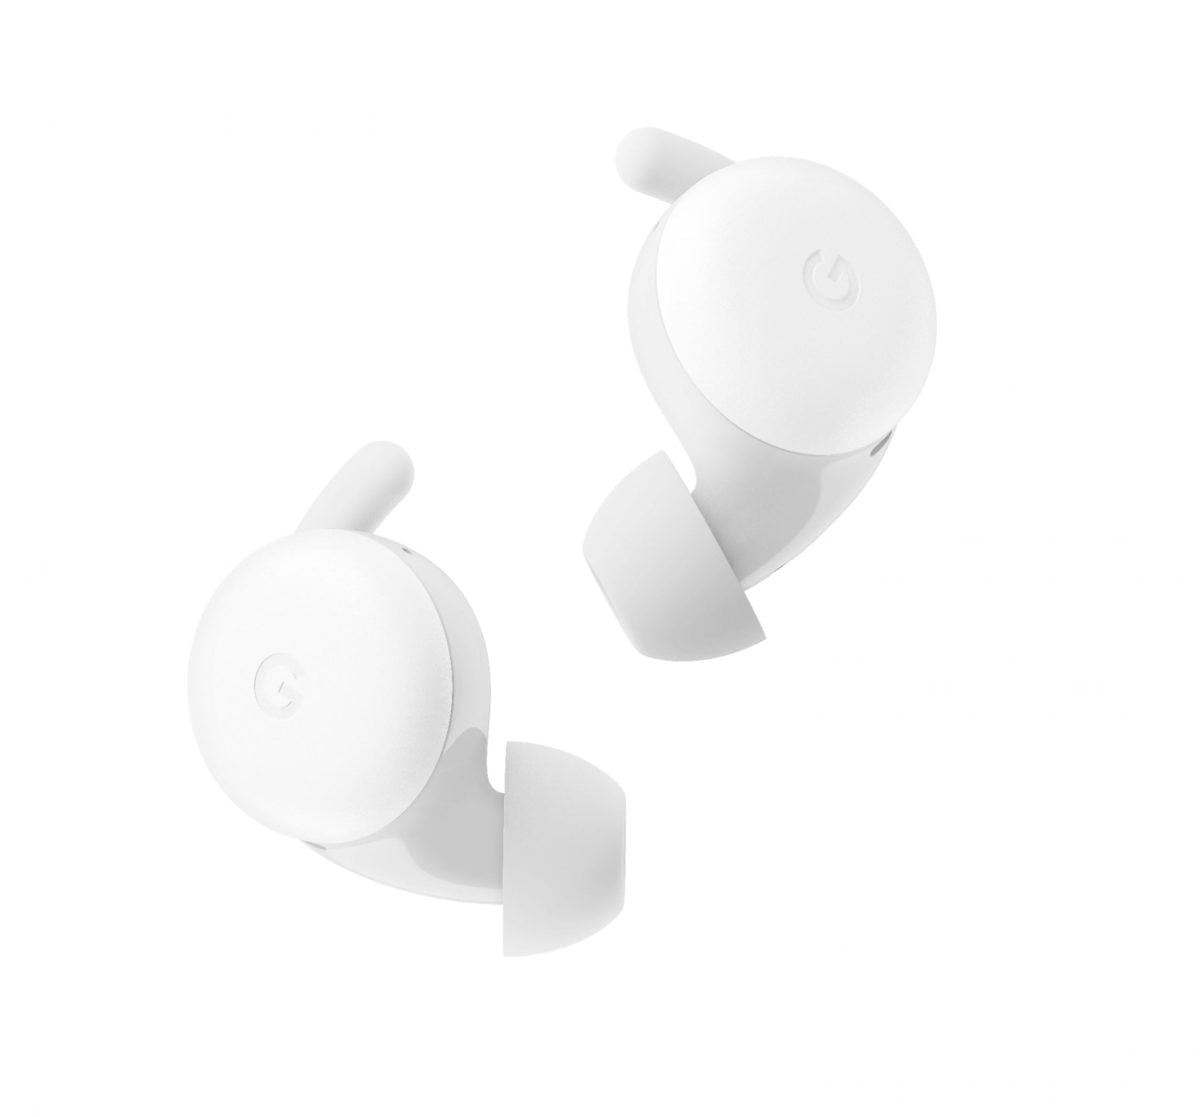 6461033Cv12D Scaled Google &Amp;Lt;H1&Amp;Gt;Google - Pixel Buds A-Series True Wireless In-Ear Headphones - Clearly White&Amp;Lt;/H1&Amp;Gt; &Amp;Lt;Div Class=&Amp;Quot;Long-Description-Container Body-Copy &Amp;Quot;&Amp;Gt; &Amp;Lt;Div Class=&Amp;Quot;Html-Fragment&Amp;Quot;&Amp;Gt; &Amp;Lt;Div&Amp;Gt; &Amp;Lt;Div&Amp;Gt;Pixel Buds A-Series Bring You Rich, High-Quality Sound For A Lot Less Than You’d Expect. Their Beamforming Mics Help Make Calls Crystal Clear. The Flush-To-Ear Design Is Stylish, And The Stabilizer Arc Keeps Them In Place So You Can Wear Them Even During The Sweatiest Workout.&Amp;Lt;/Div&Amp;Gt; &Amp;Lt;Div&Amp;Gt;&Amp;Lt;/Div&Amp;Gt; &Amp;Lt;/Div&Amp;Gt; &Amp;Lt;/Div&Amp;Gt; &Amp;Lt;/Div&Amp;Gt; Pixel Buds Google - Pixel Buds A-Series True Wireless In-Ear Headphones - Clearly White